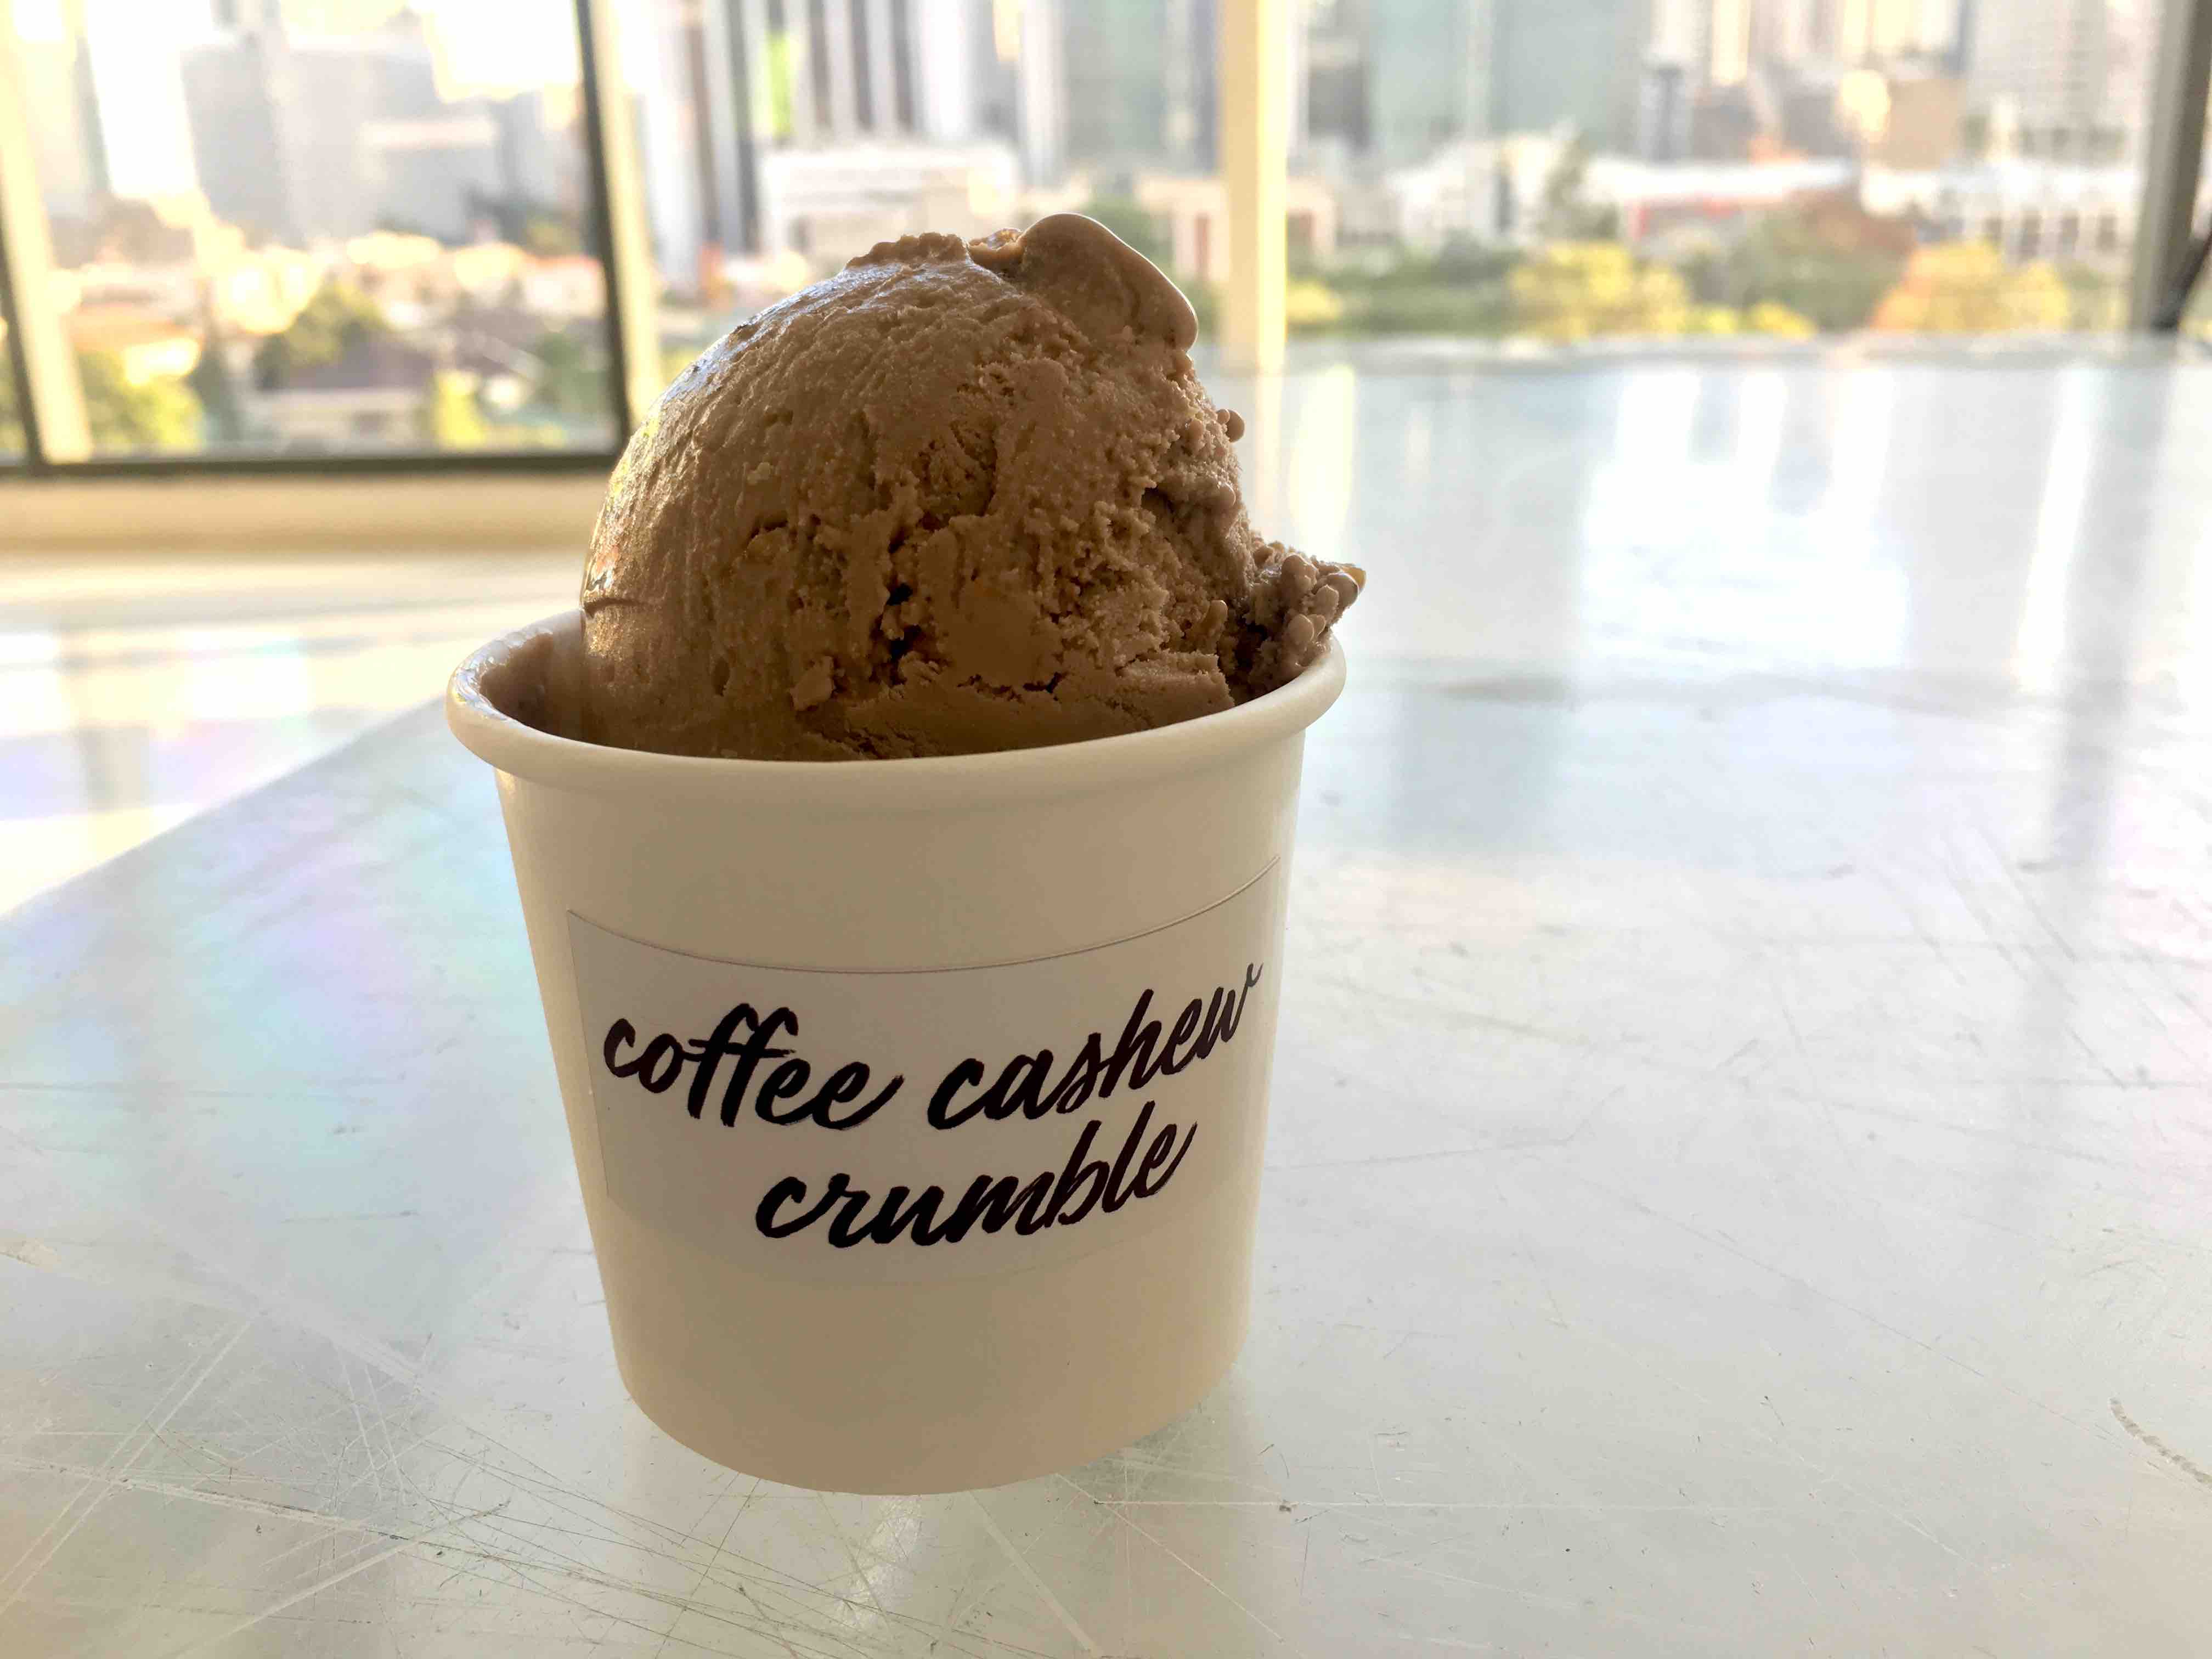 Super Scoops’ Coffee Cashew Crumble ice cream. (Photo: Therese Reyes) 